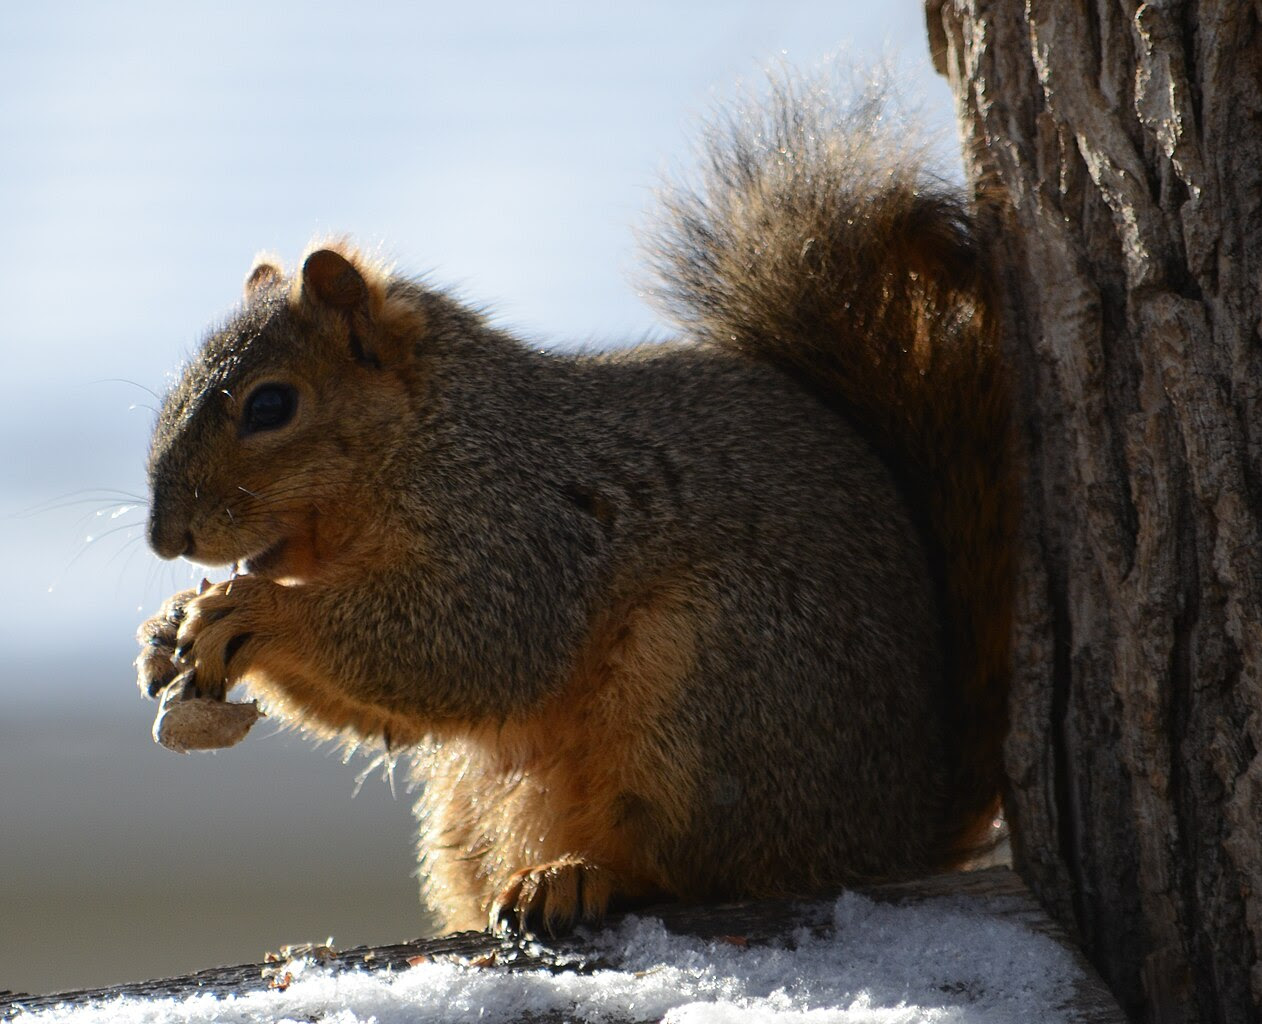 http://upload.wikimedia.org/wikipedia/commons/thumb/d/d7/Squirrel_Eating_a_peanut.jpg/1262px-Squirrel_Eating_a_peanut.jpg